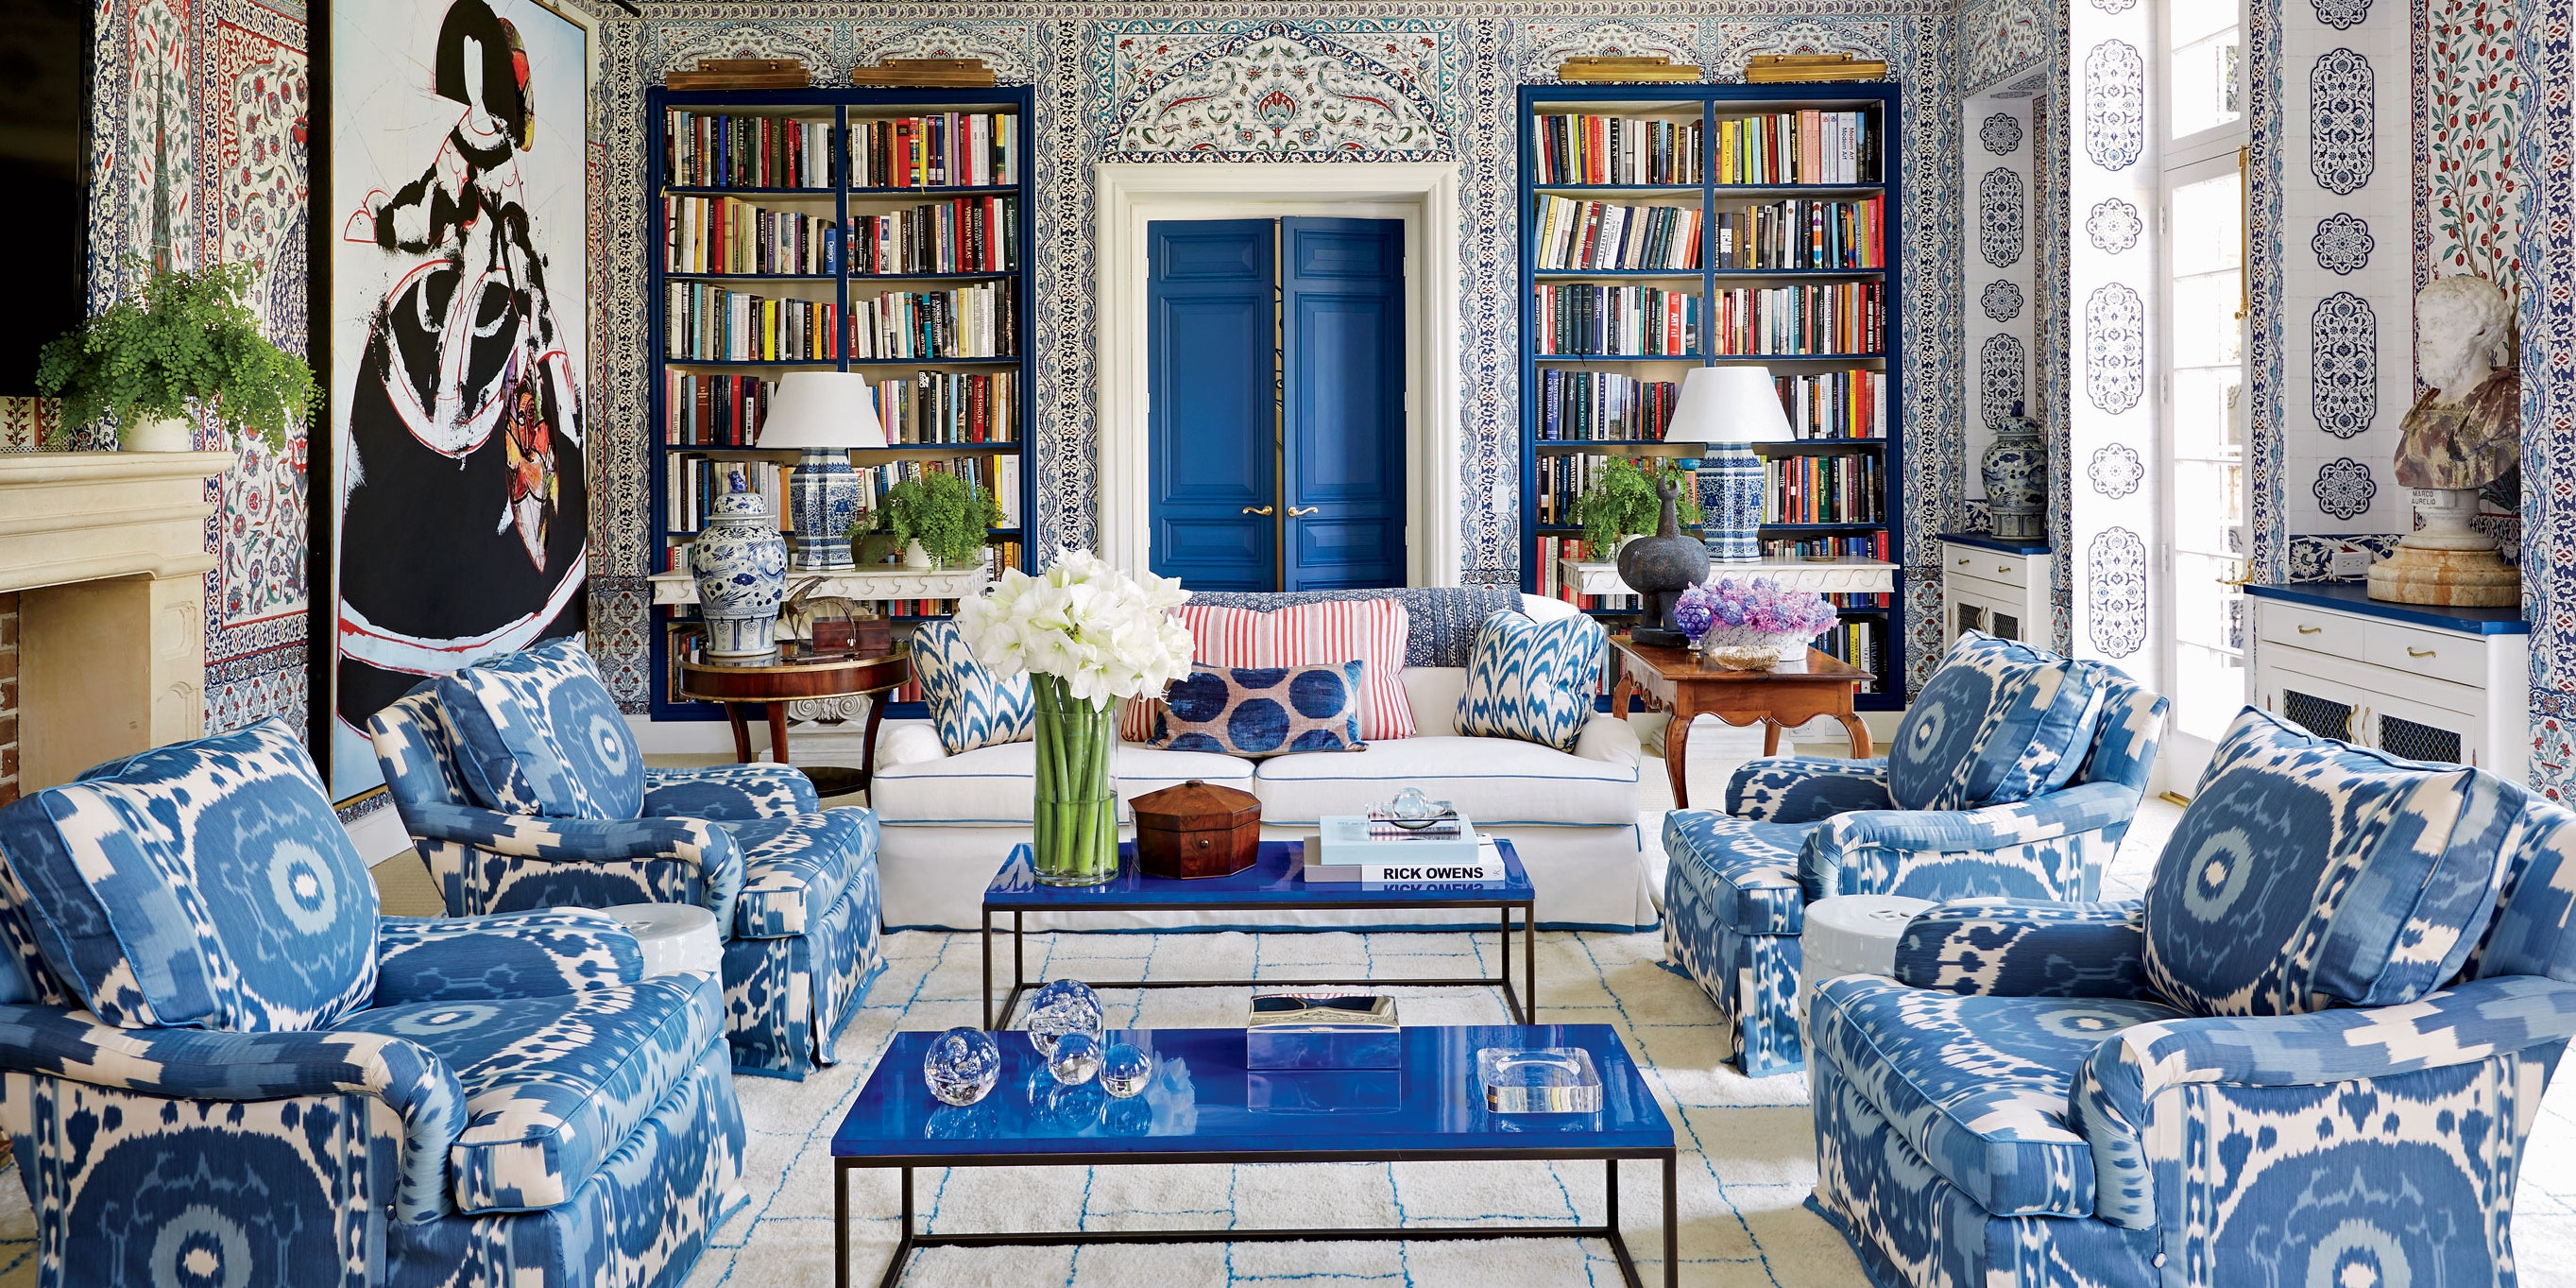 33 Wallpaper Ideas for Every Room Architectural Digest 2727x1363